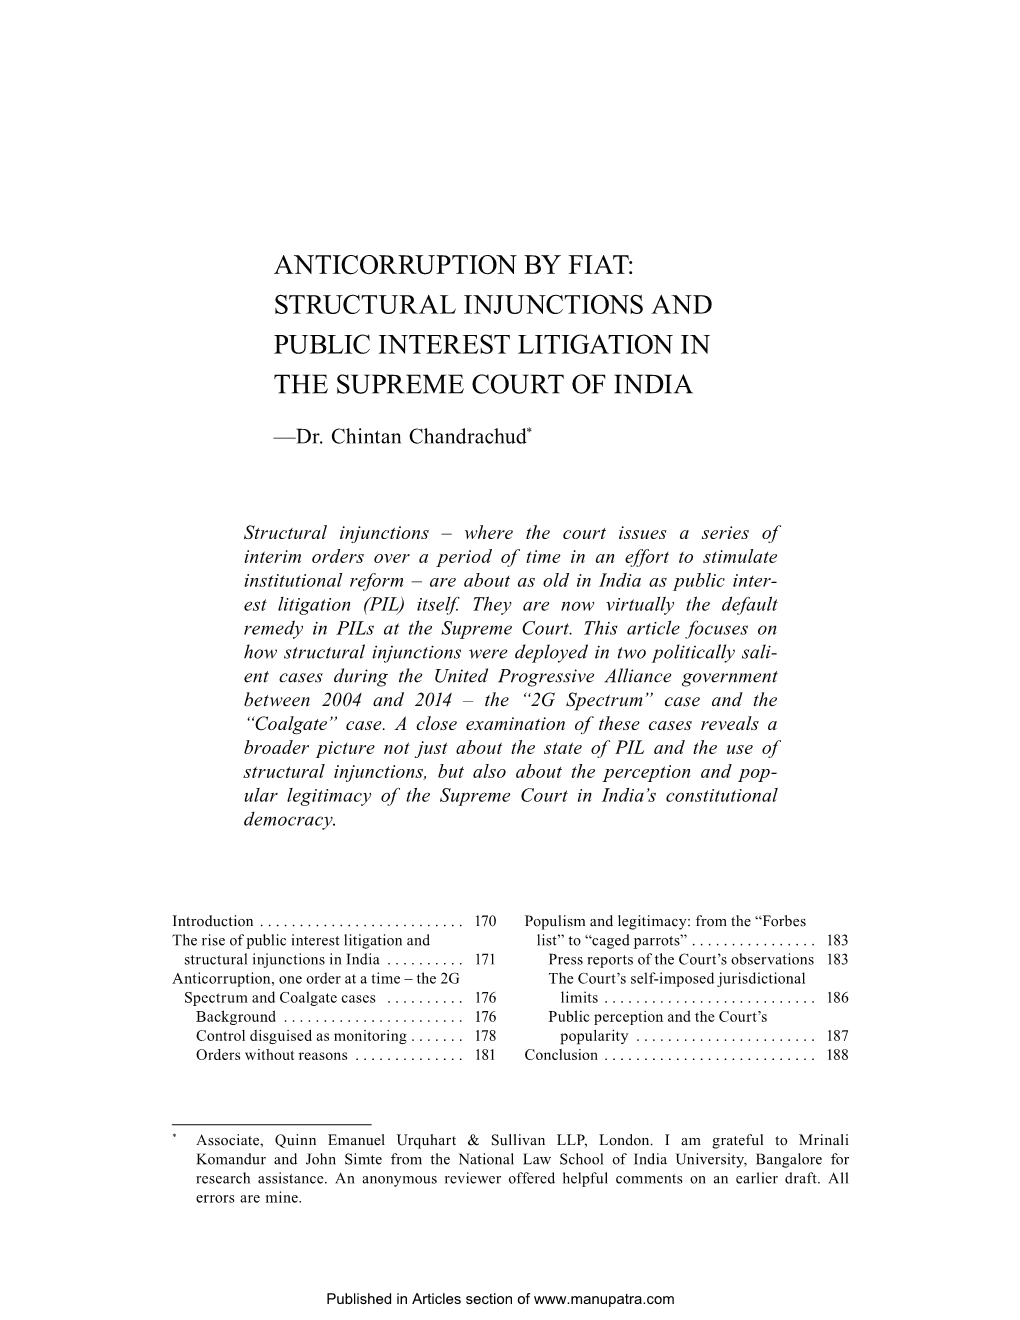 Anticorruption by Fiat: Structural Injunctions and Public Interest Litigation in the Supreme Court of India